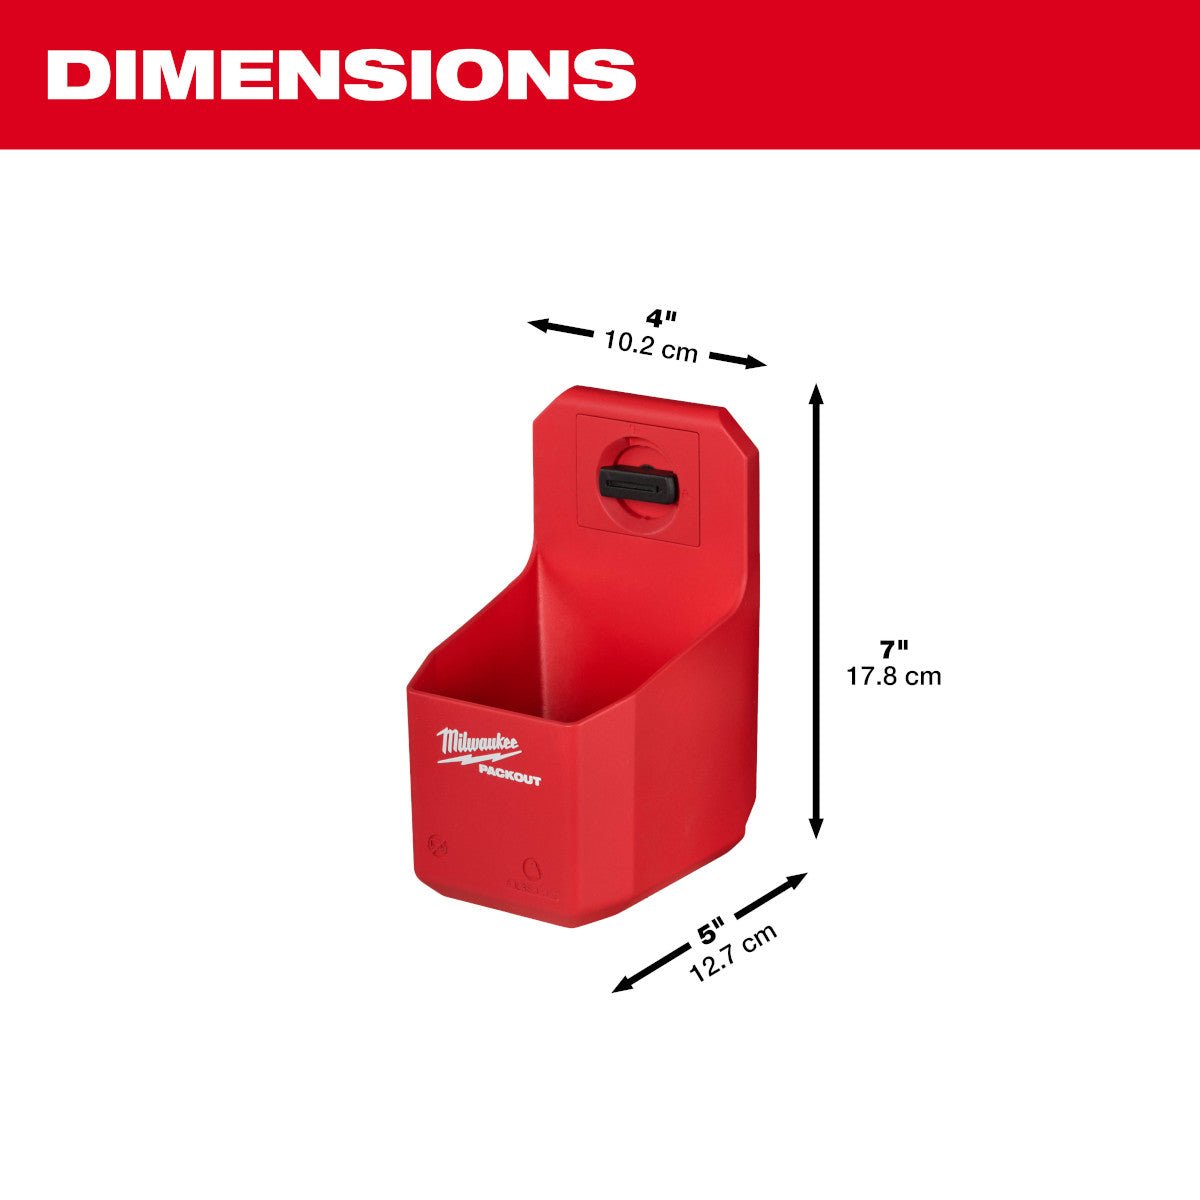 Milwaukee 48-22-8336 - PACKOUT™ Organizer Cup